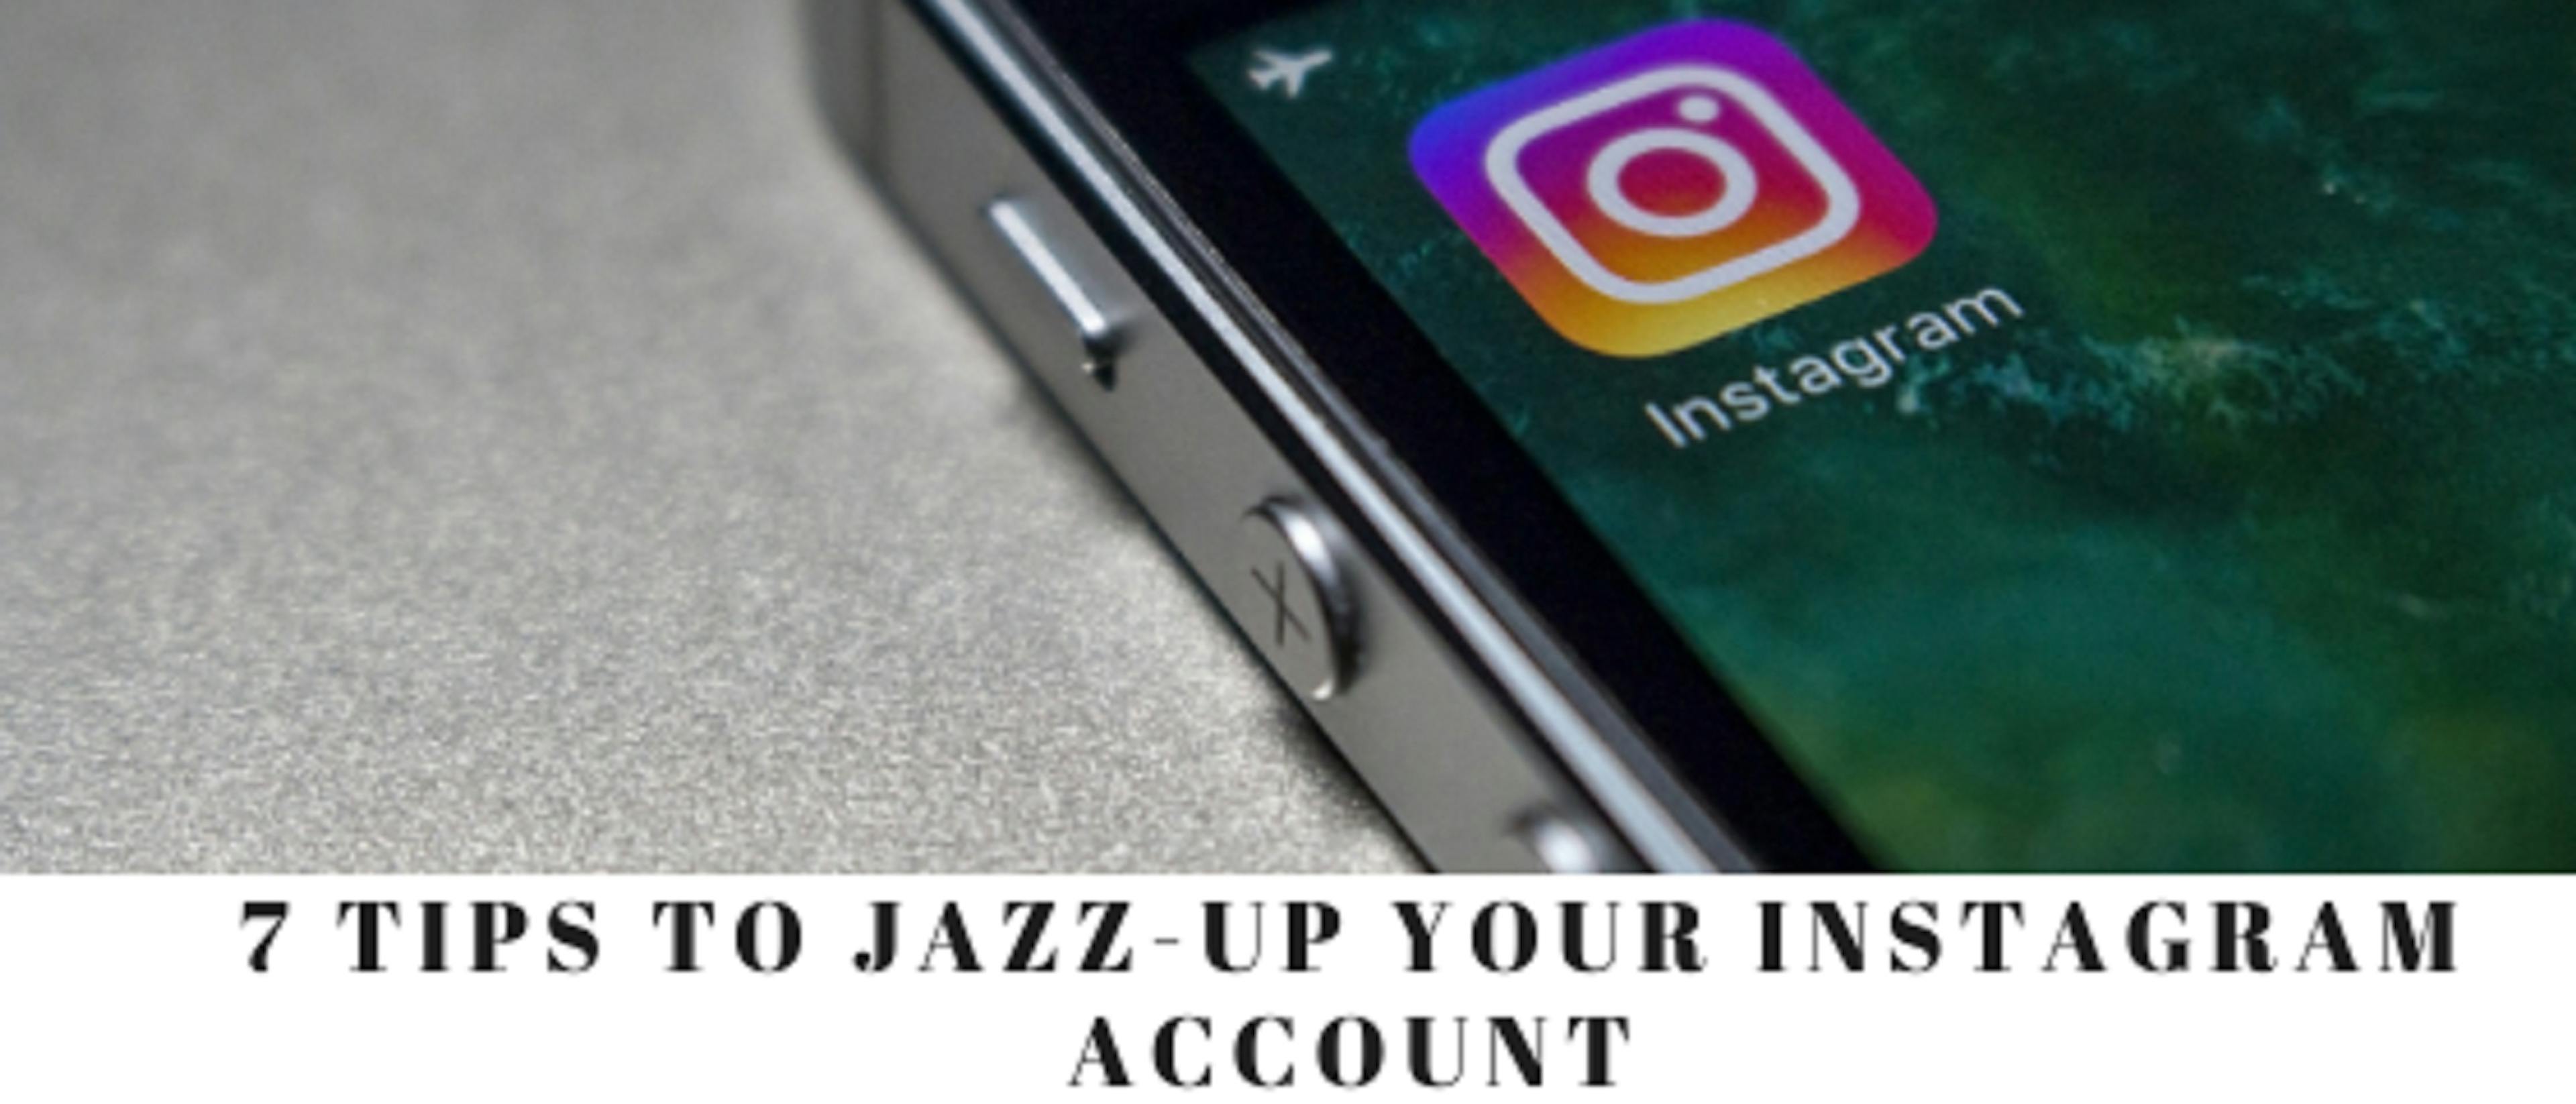 featured image - 7 tips to jazz-up your Instagram account